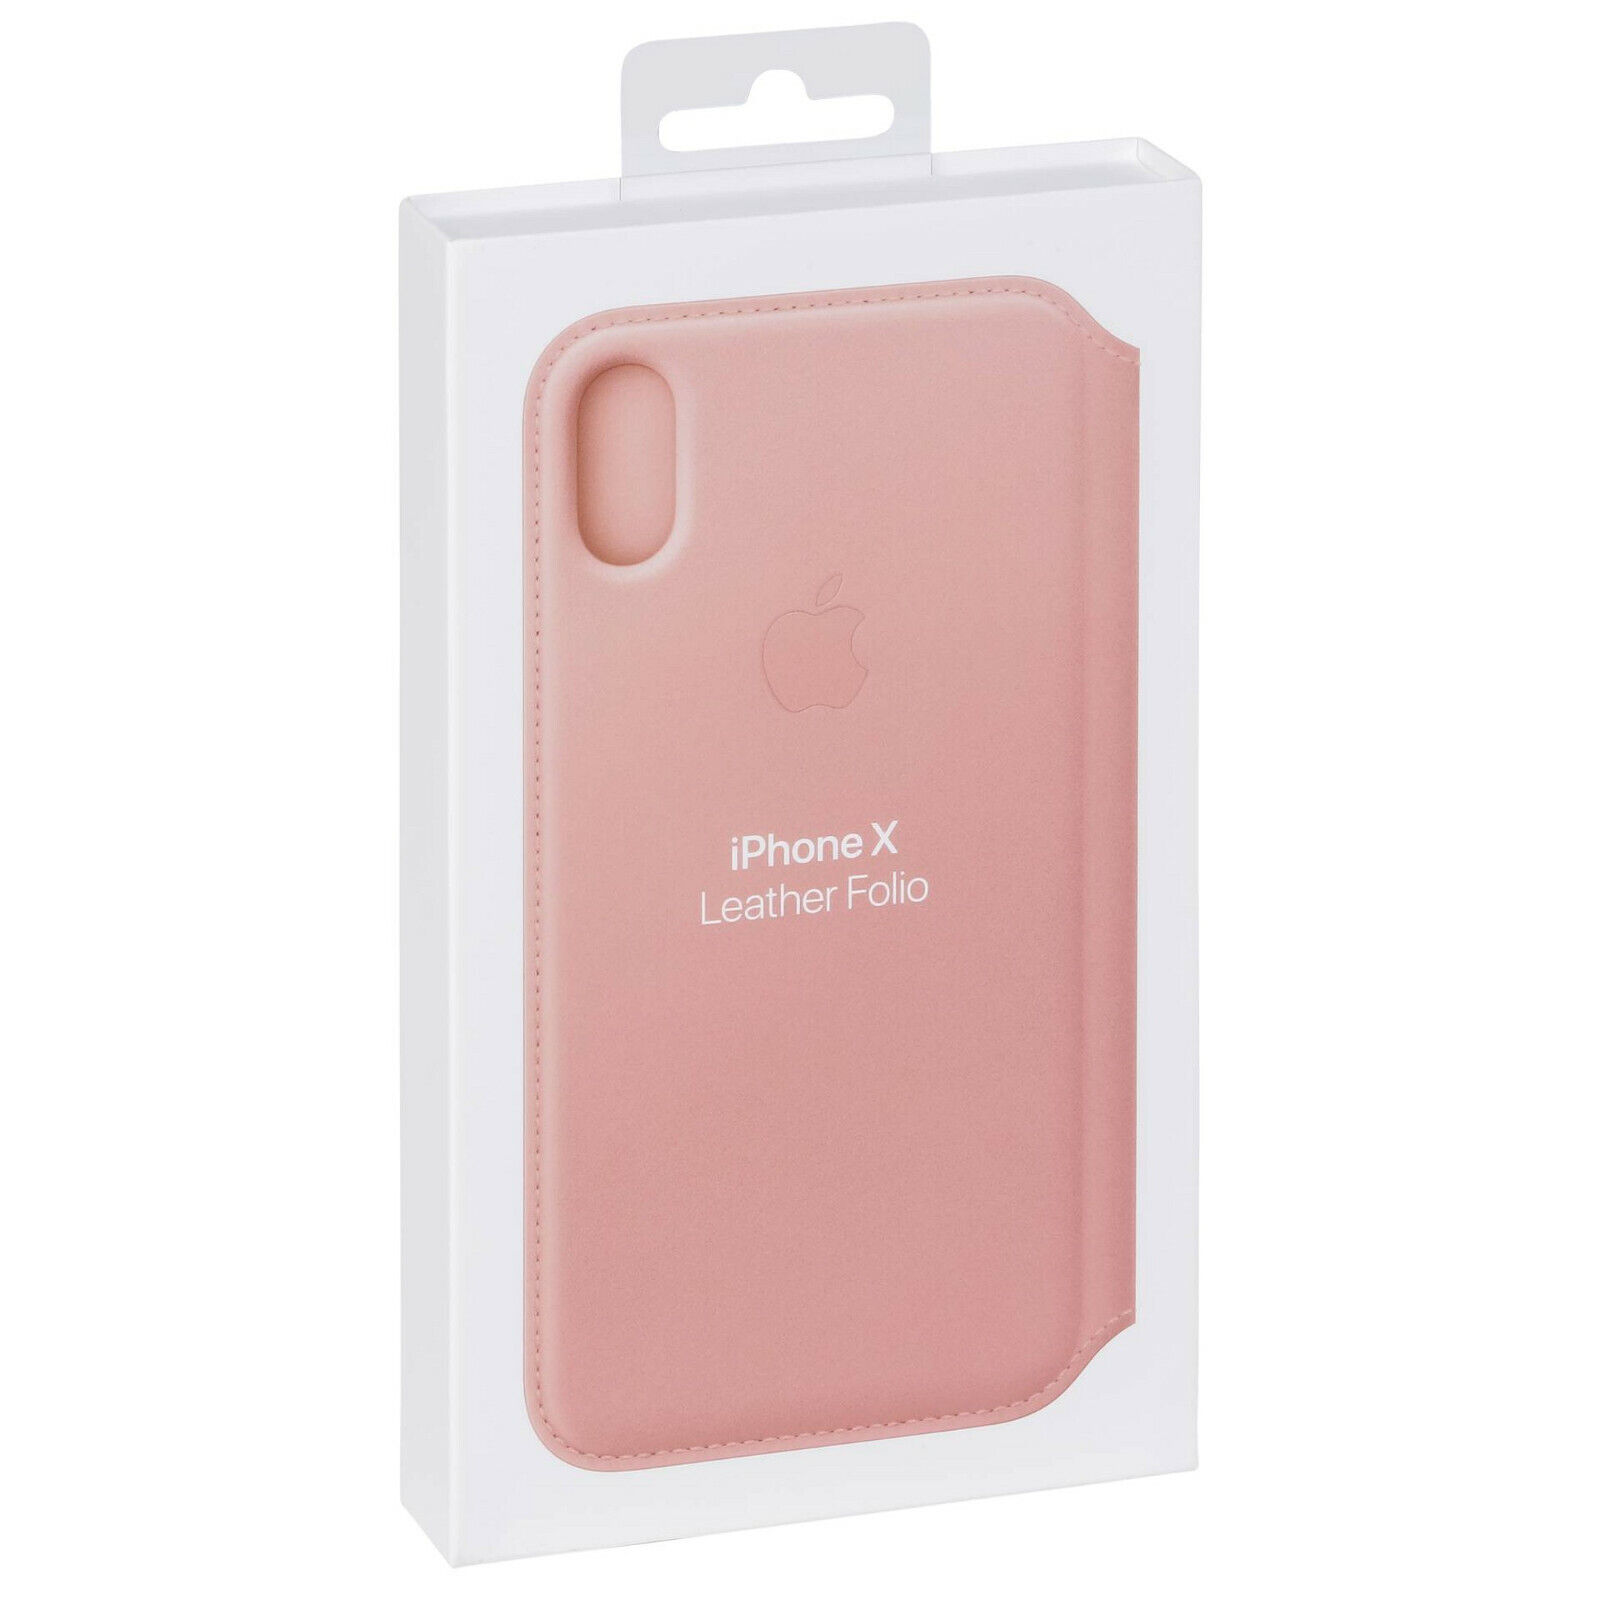 NEW Genuine Apple MRGF2ZM/A Leather Folio Case Cover for iPhone X Soft Pink